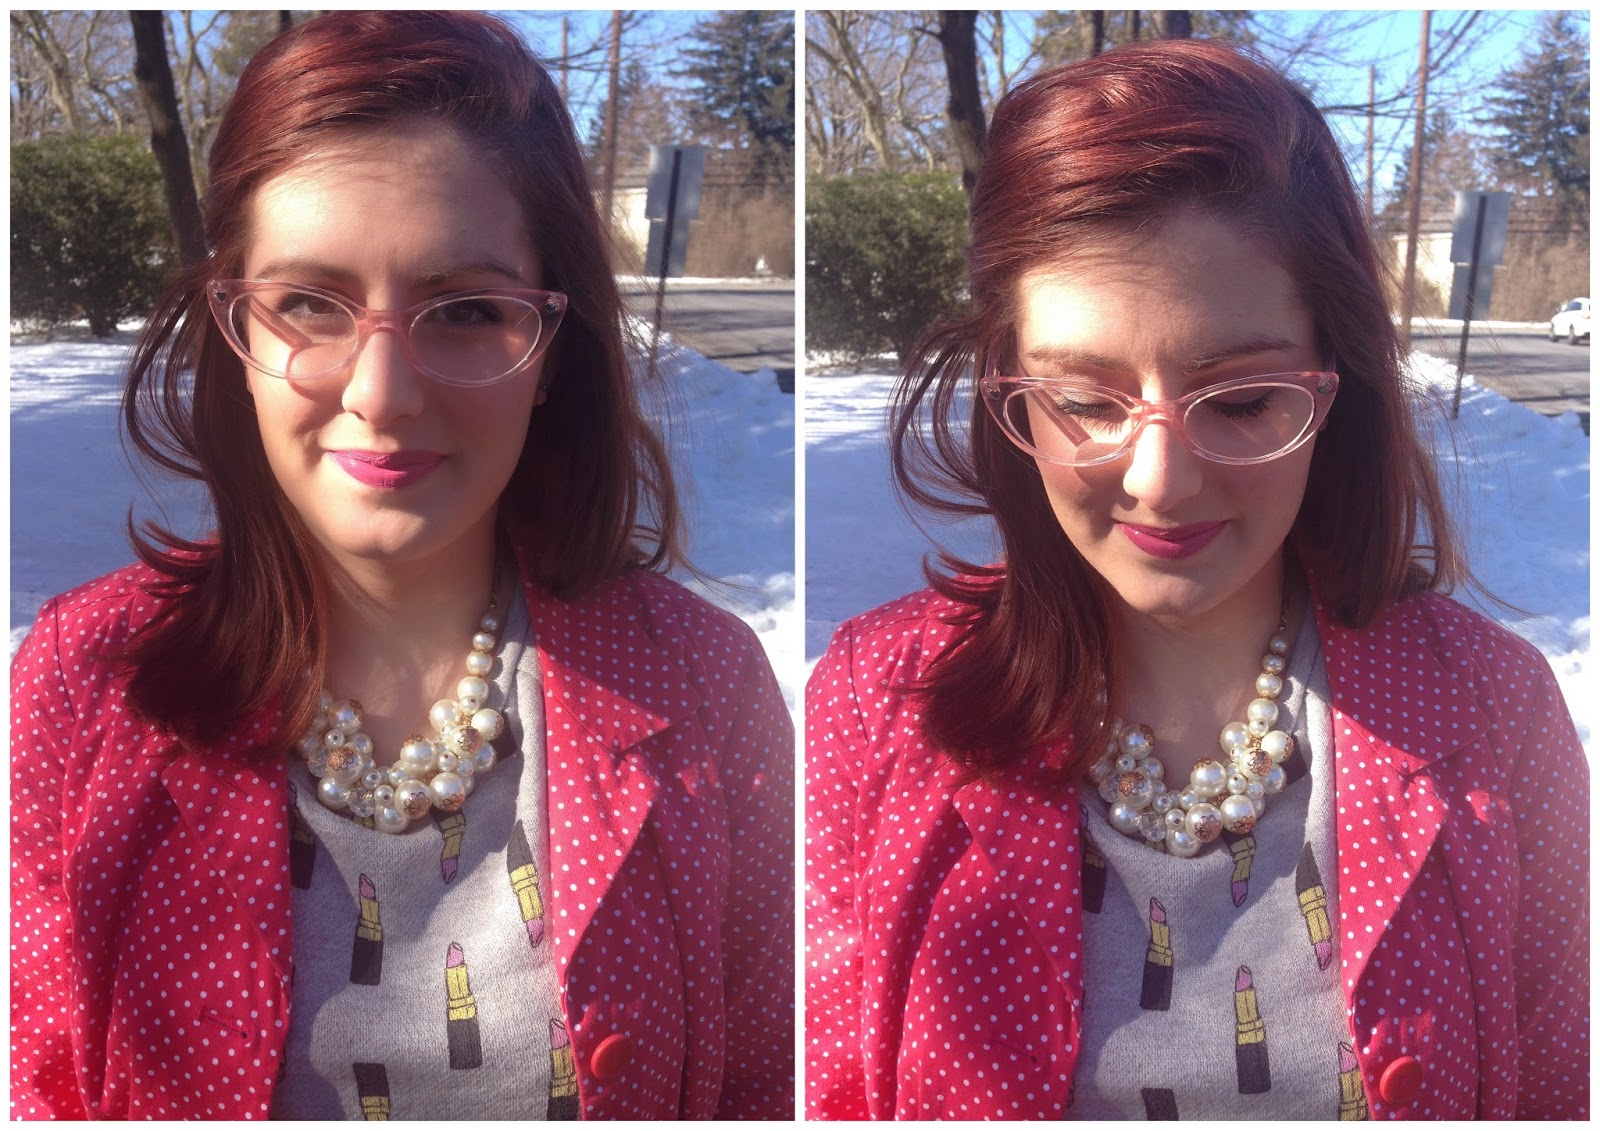 behind the leopard glasses: Day 1 of LOVE: lipstick print and ice cream ...